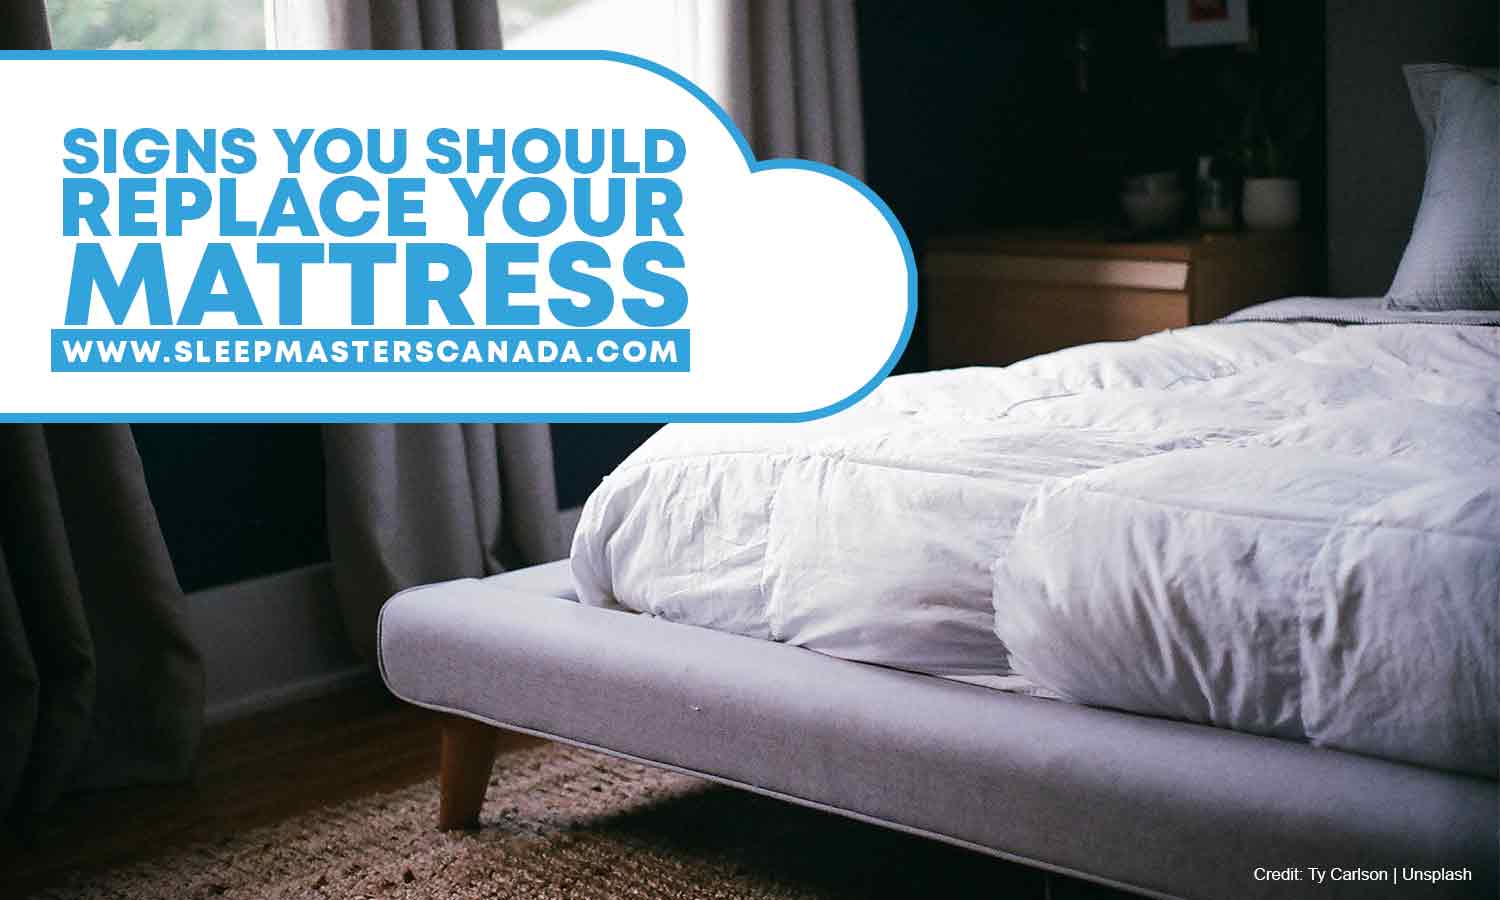 Signs You Should Replace Your Mattress